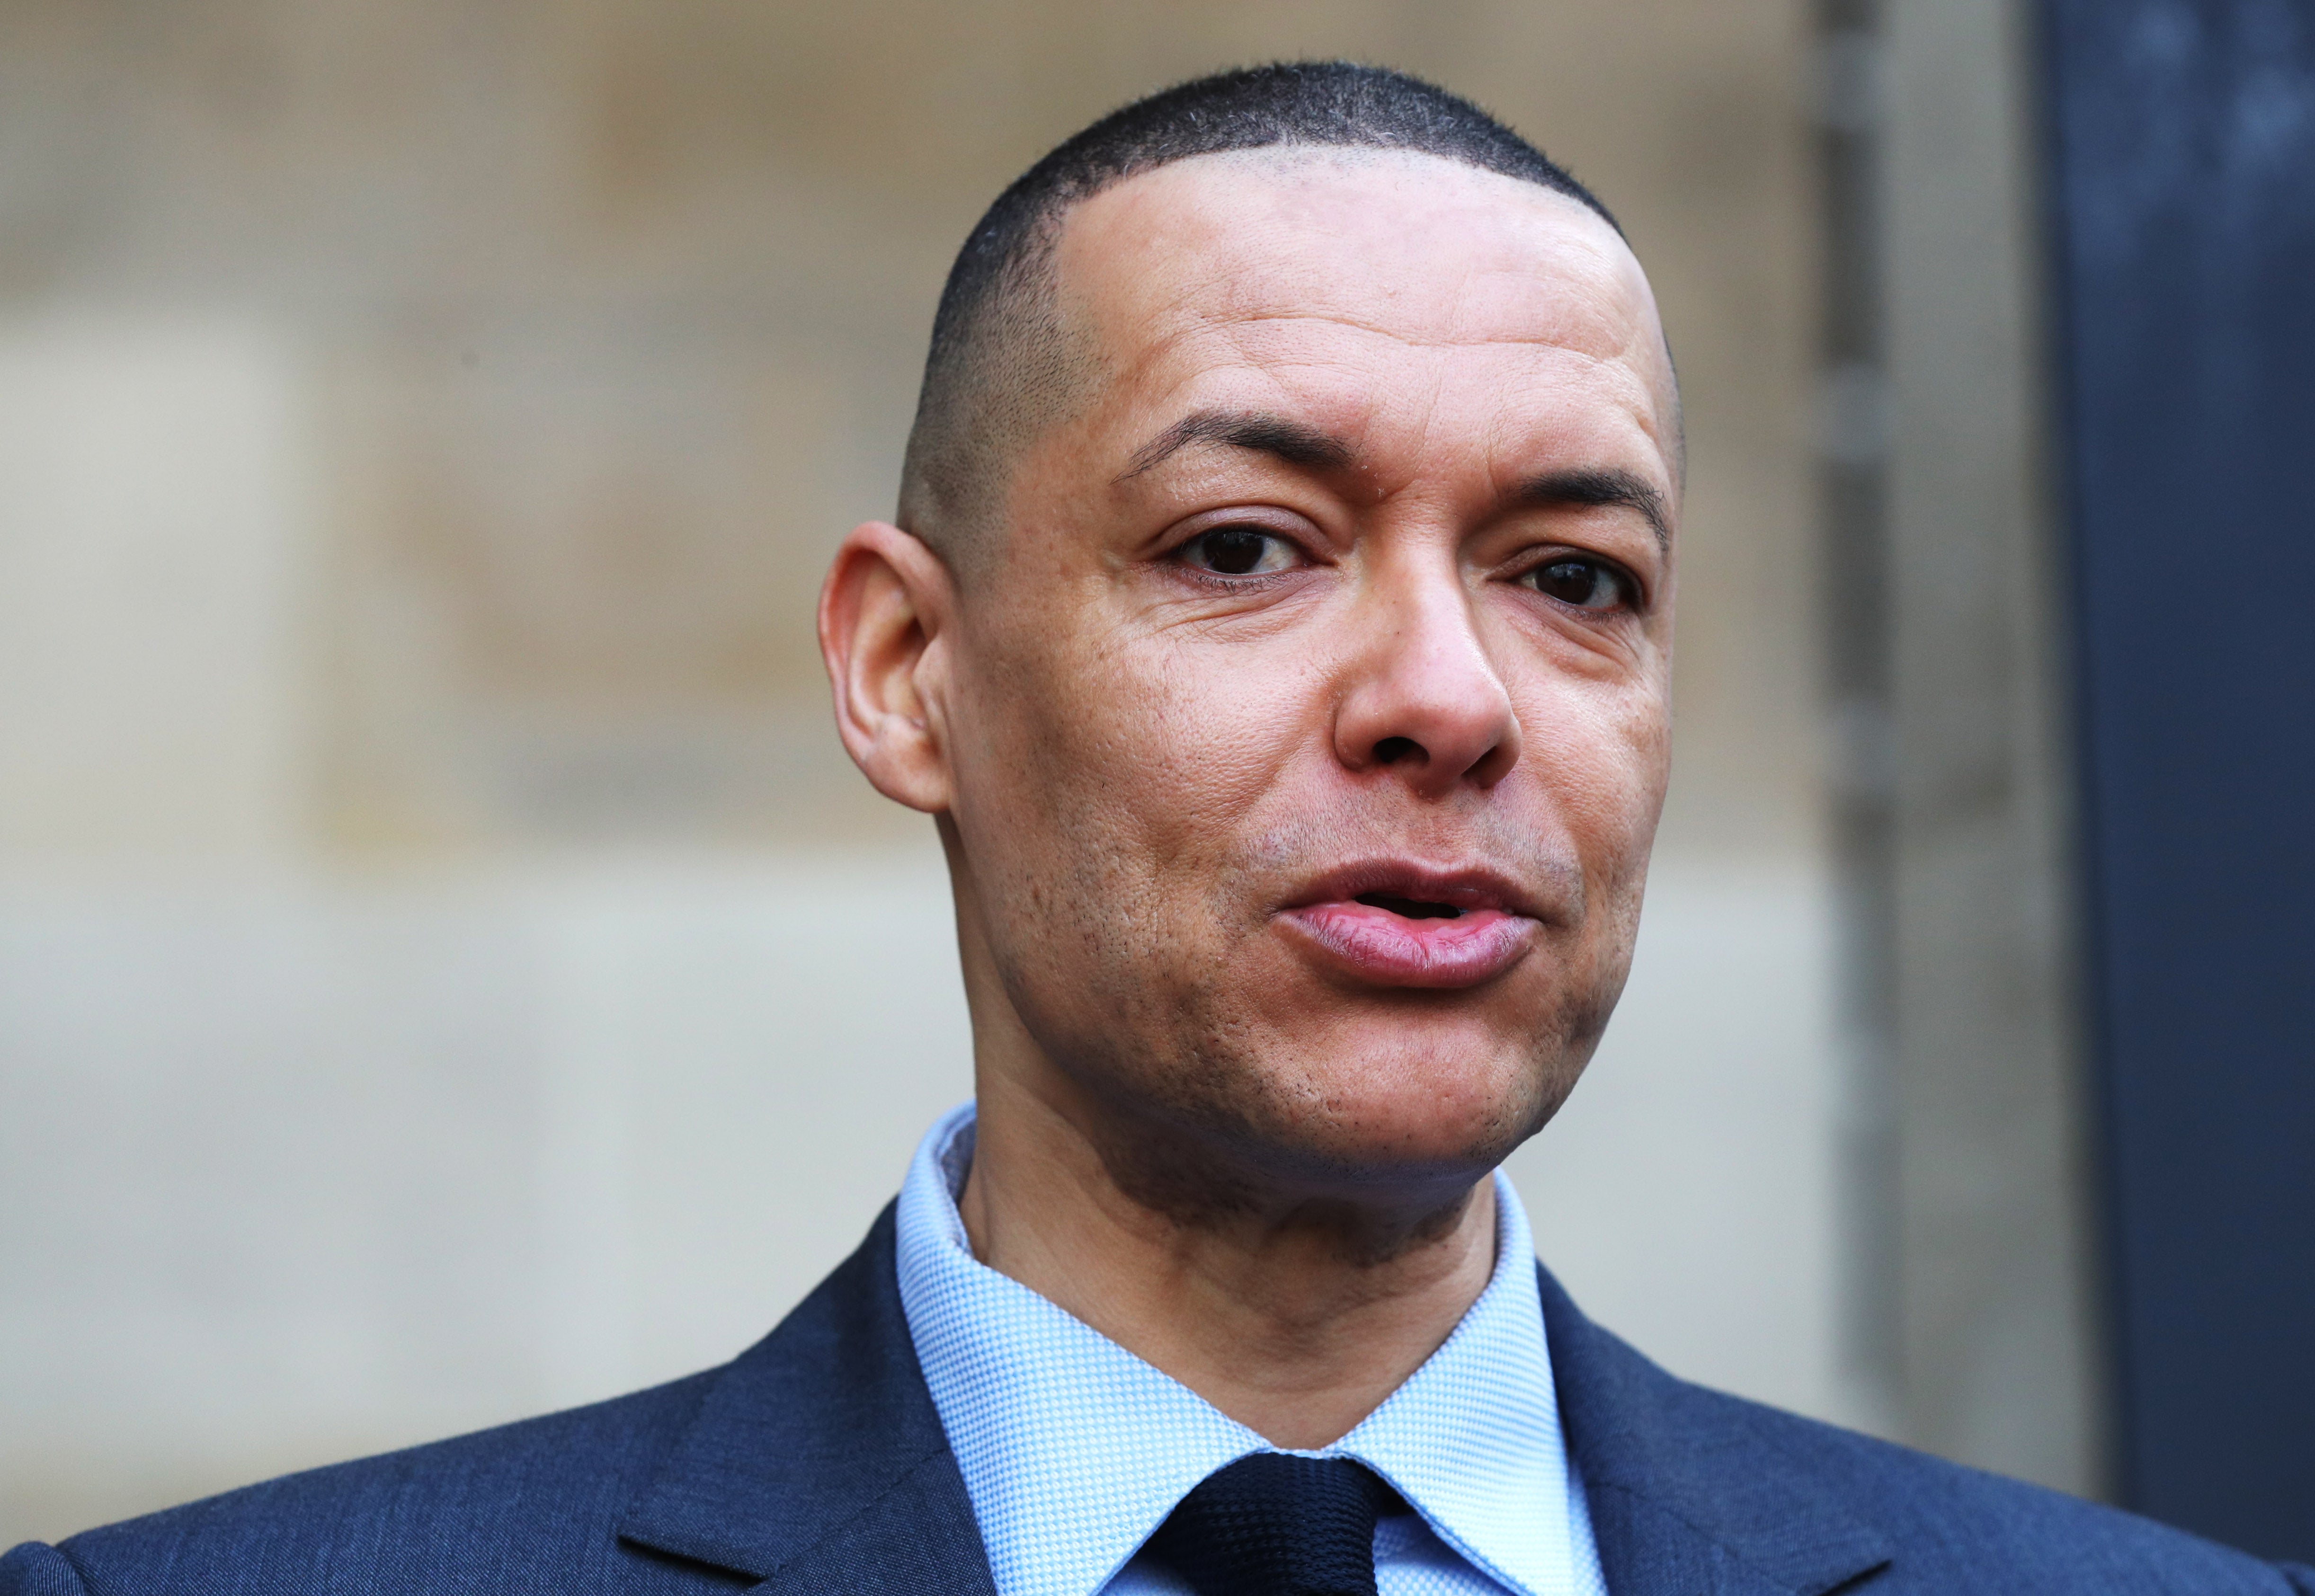 Clive Lewis denied his language was directed at Commons staff